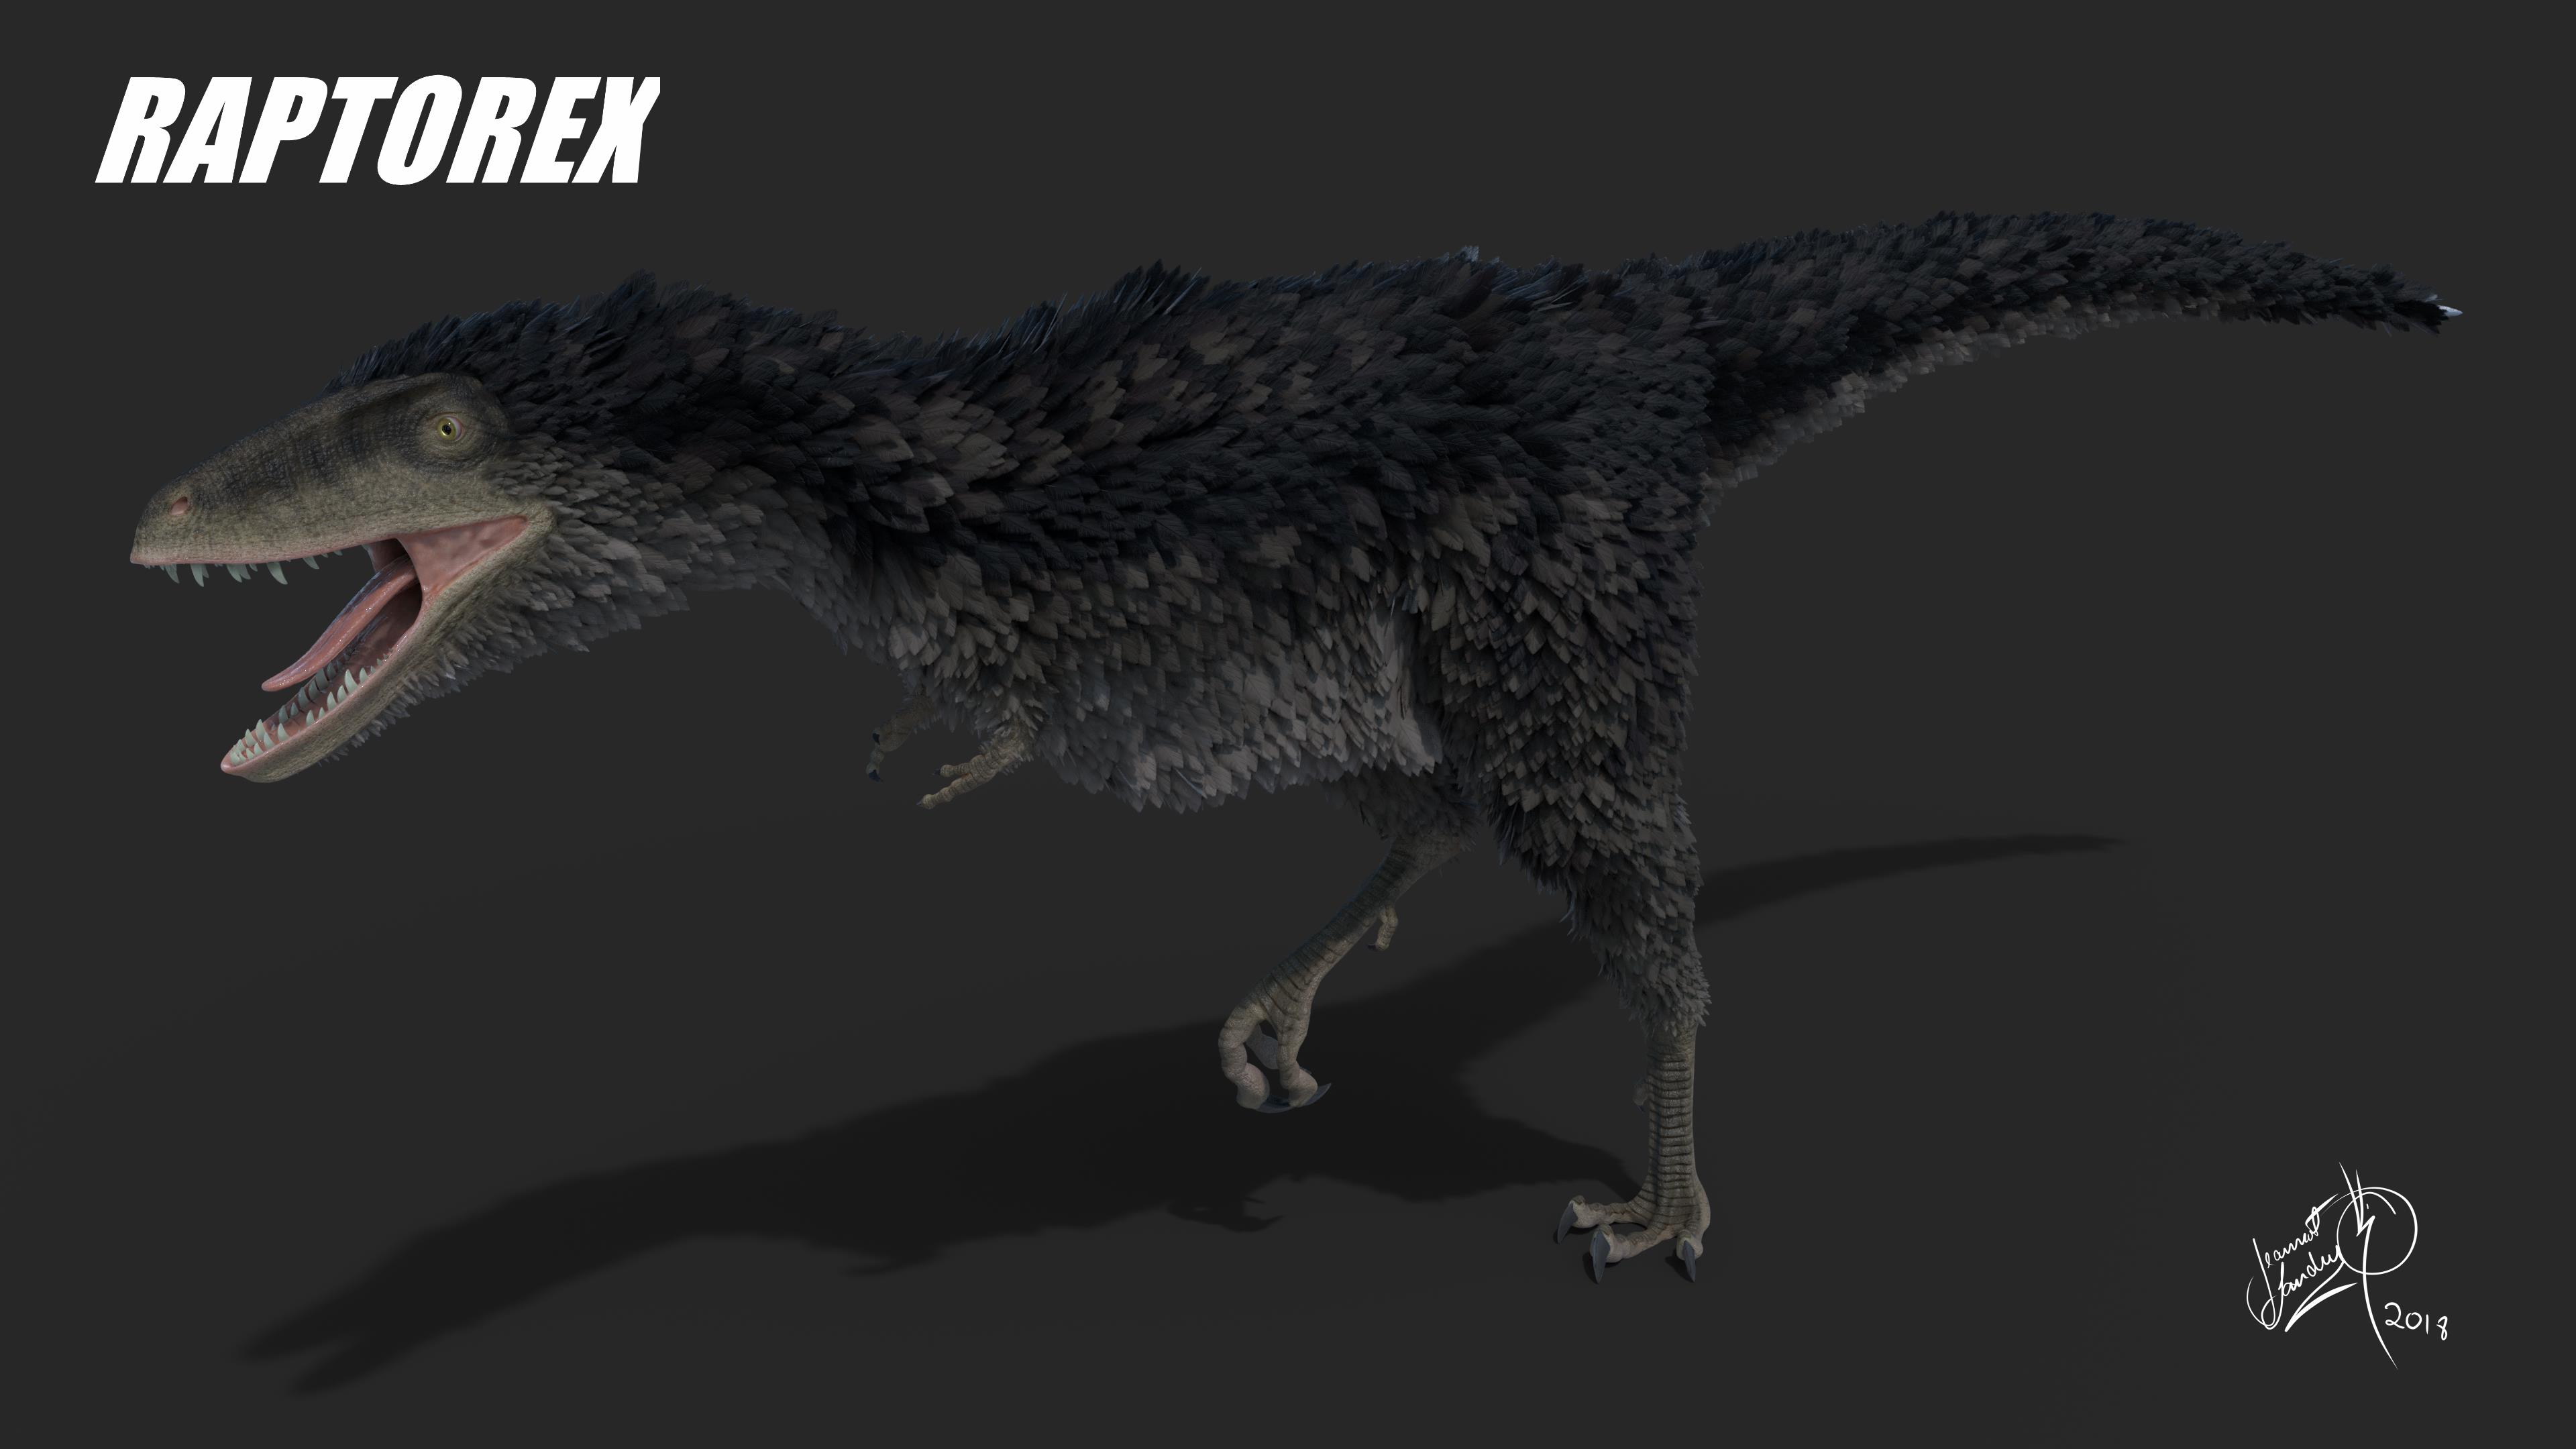 Raptorex_Feathered_Posed_4K_by_Jeannot_Landry_2018_compressed.jpg